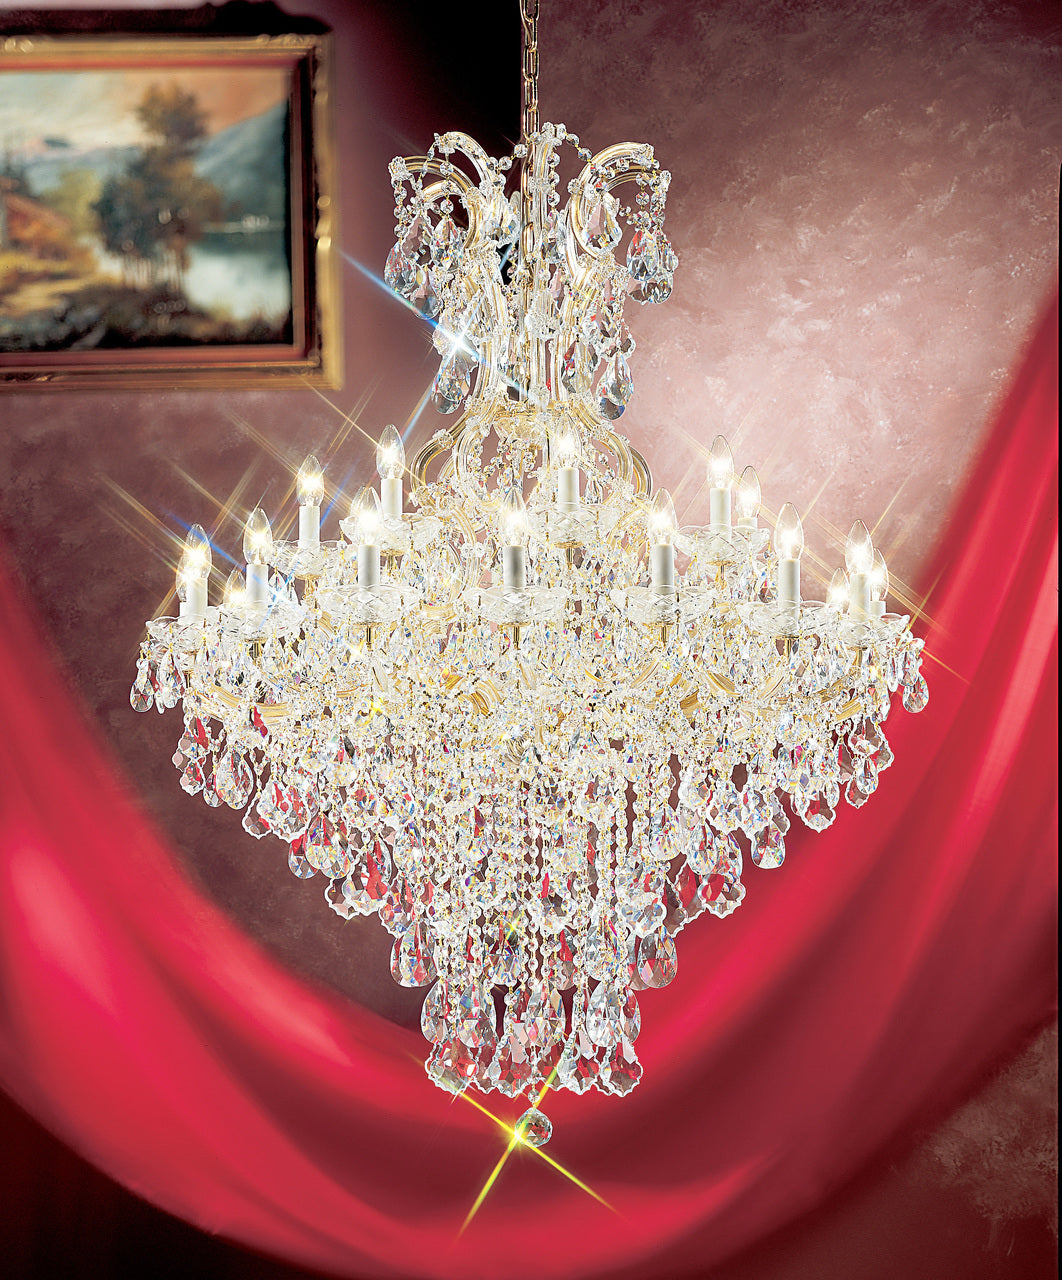 Classic Lighting 8179 OWG S Maria Theresa Traditional Crystal Chandelier in Olde World Gold (Imported from Italy)